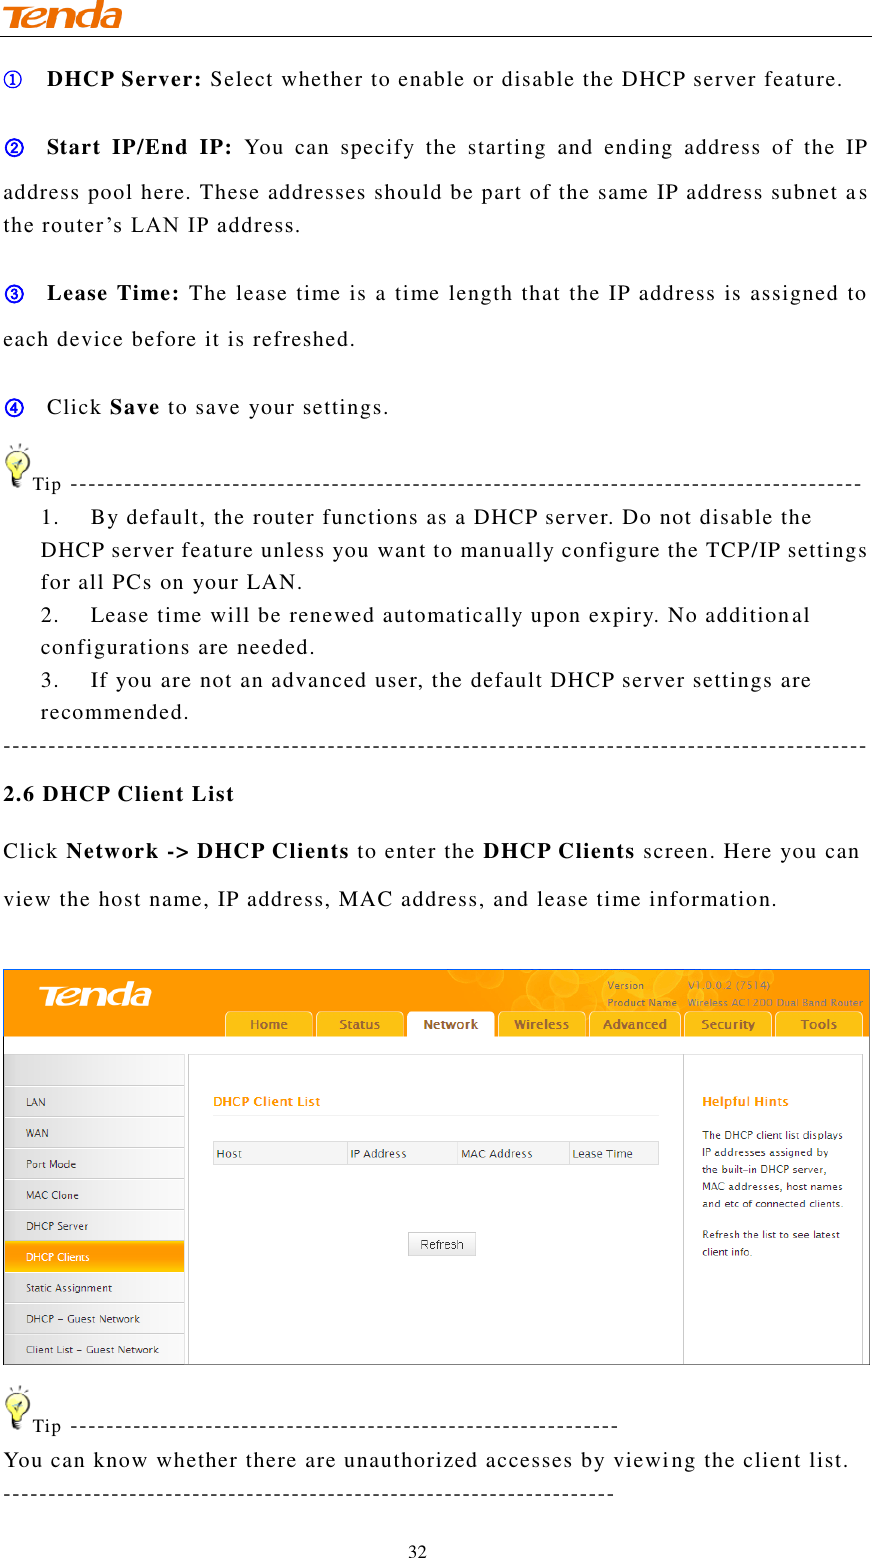                                    32 ① DHCP Server: Select whether to enable or disable the DHCP server feature. ② Start  IP/End  IP:  You  can  specify  the  starting  and  ending  address  of  the  IP address pool here. These addresses should be part of the same IP address subnet a s the router’s LAN IP address. ③ Lease Time: The lease time is a time length that the IP address is assigned to each device before it is refreshed. ④ Click Save to save your settings. Tip ---------------------------------------------------------------------------------------- 1. By default, the router functions as a DHCP server. Do not disable the DHCP server feature unless you want to manually configure the TCP/IP settings for all PCs on your LAN. 2. Lease time will be renewed automatically upon expiry. No additional configurations are needed. 3. If you are not an advanced user, the default DHCP server settings are recommended. ------------------------------------------------------------------------------------------------ 2.6 DHCP Client List Click Network -&gt; DHCP Clients to enter the DHCP Clients screen. Here you can view the host name, IP address, MAC address, and lease time information.   Tip ------------------------------------------------------------- You can know whether there are unauthorized accesses by viewing the client list. -------------------------------------------------------------------- 